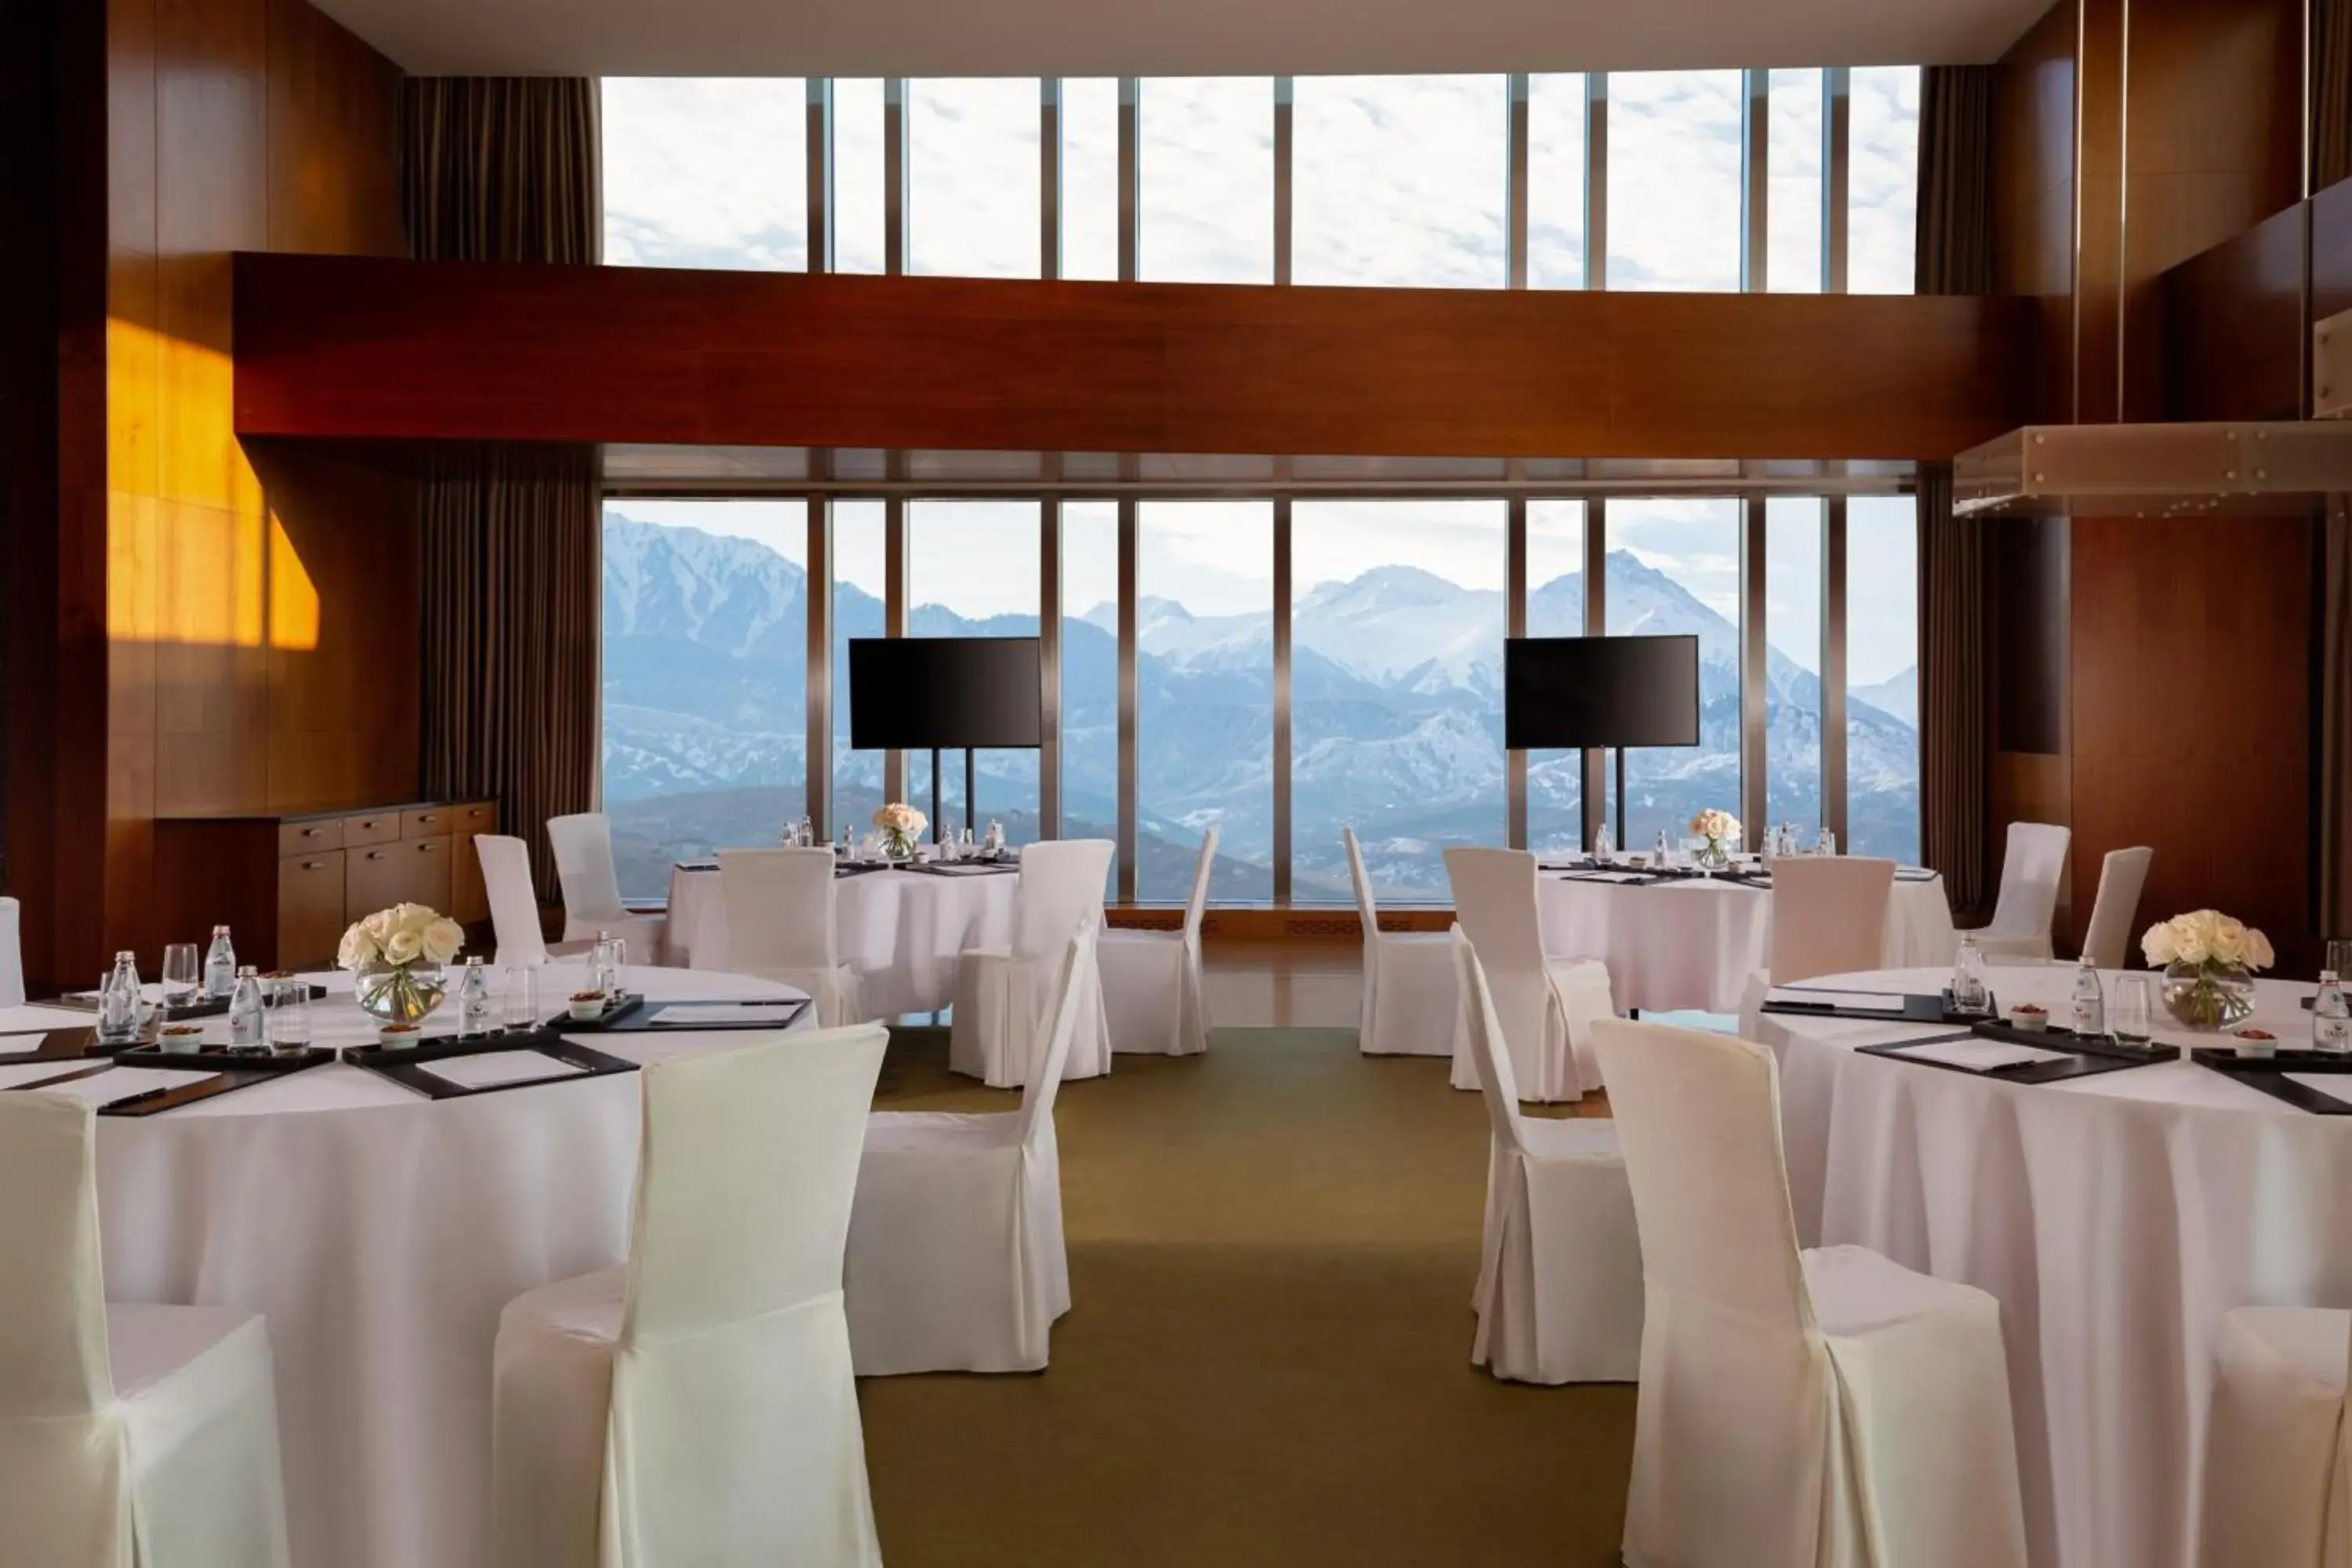 Meeting/conference room, Banquet Facilities in The Ritz-Carlton Almaty